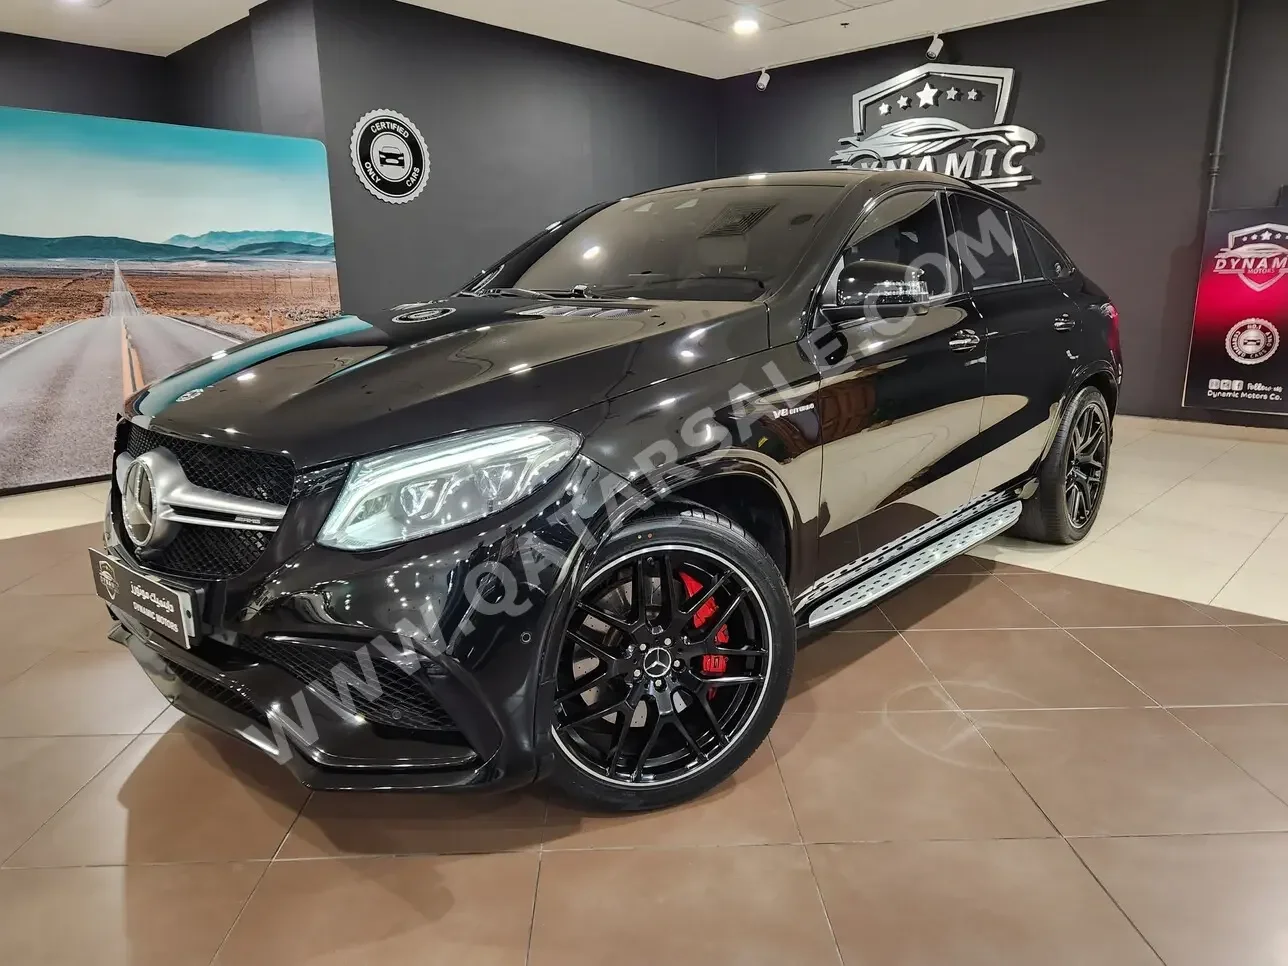 Mercedes-Benz  GLE  63S AMG  2018  Automatic  102,000 Km  8 Cylinder  Four Wheel Drive (4WD)  SUV  Black